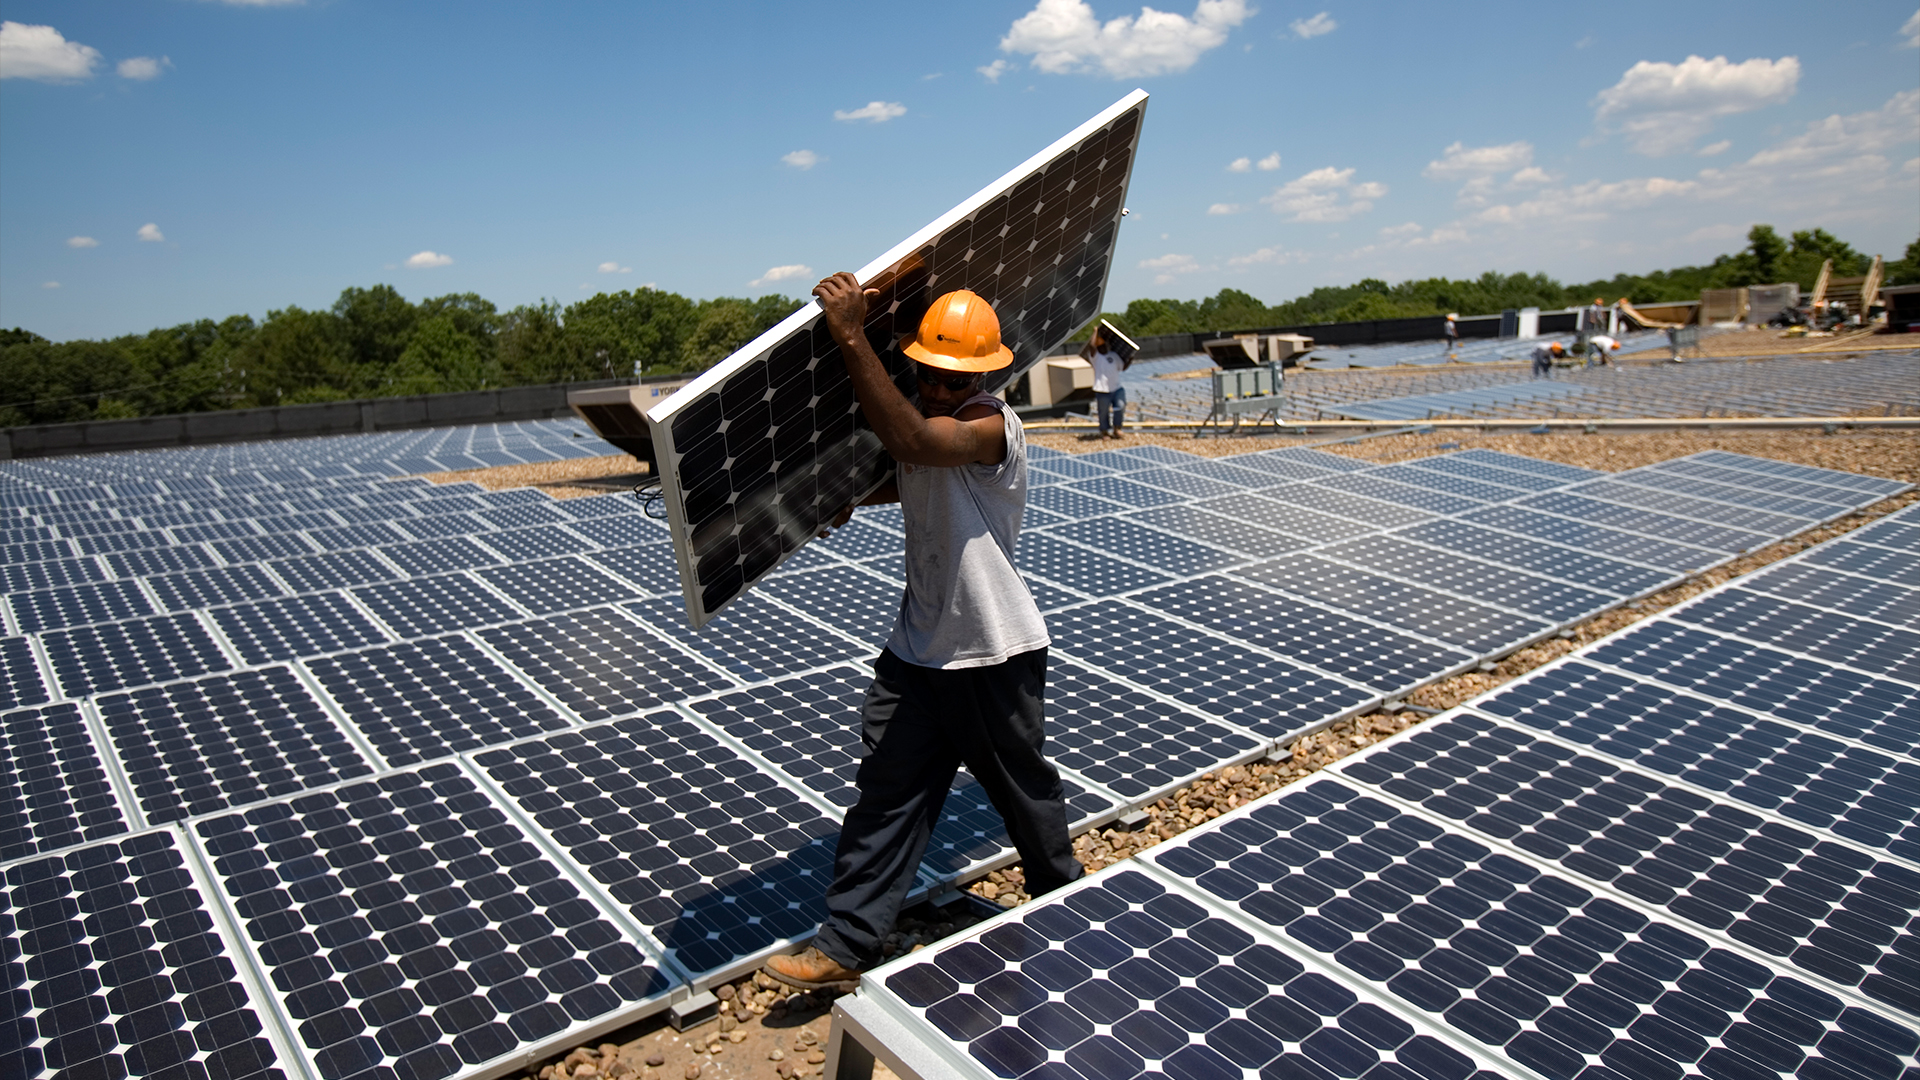 Will A Solar Farm Harm The Black Community In Archer, Florida? Residents & Experts Weigh In